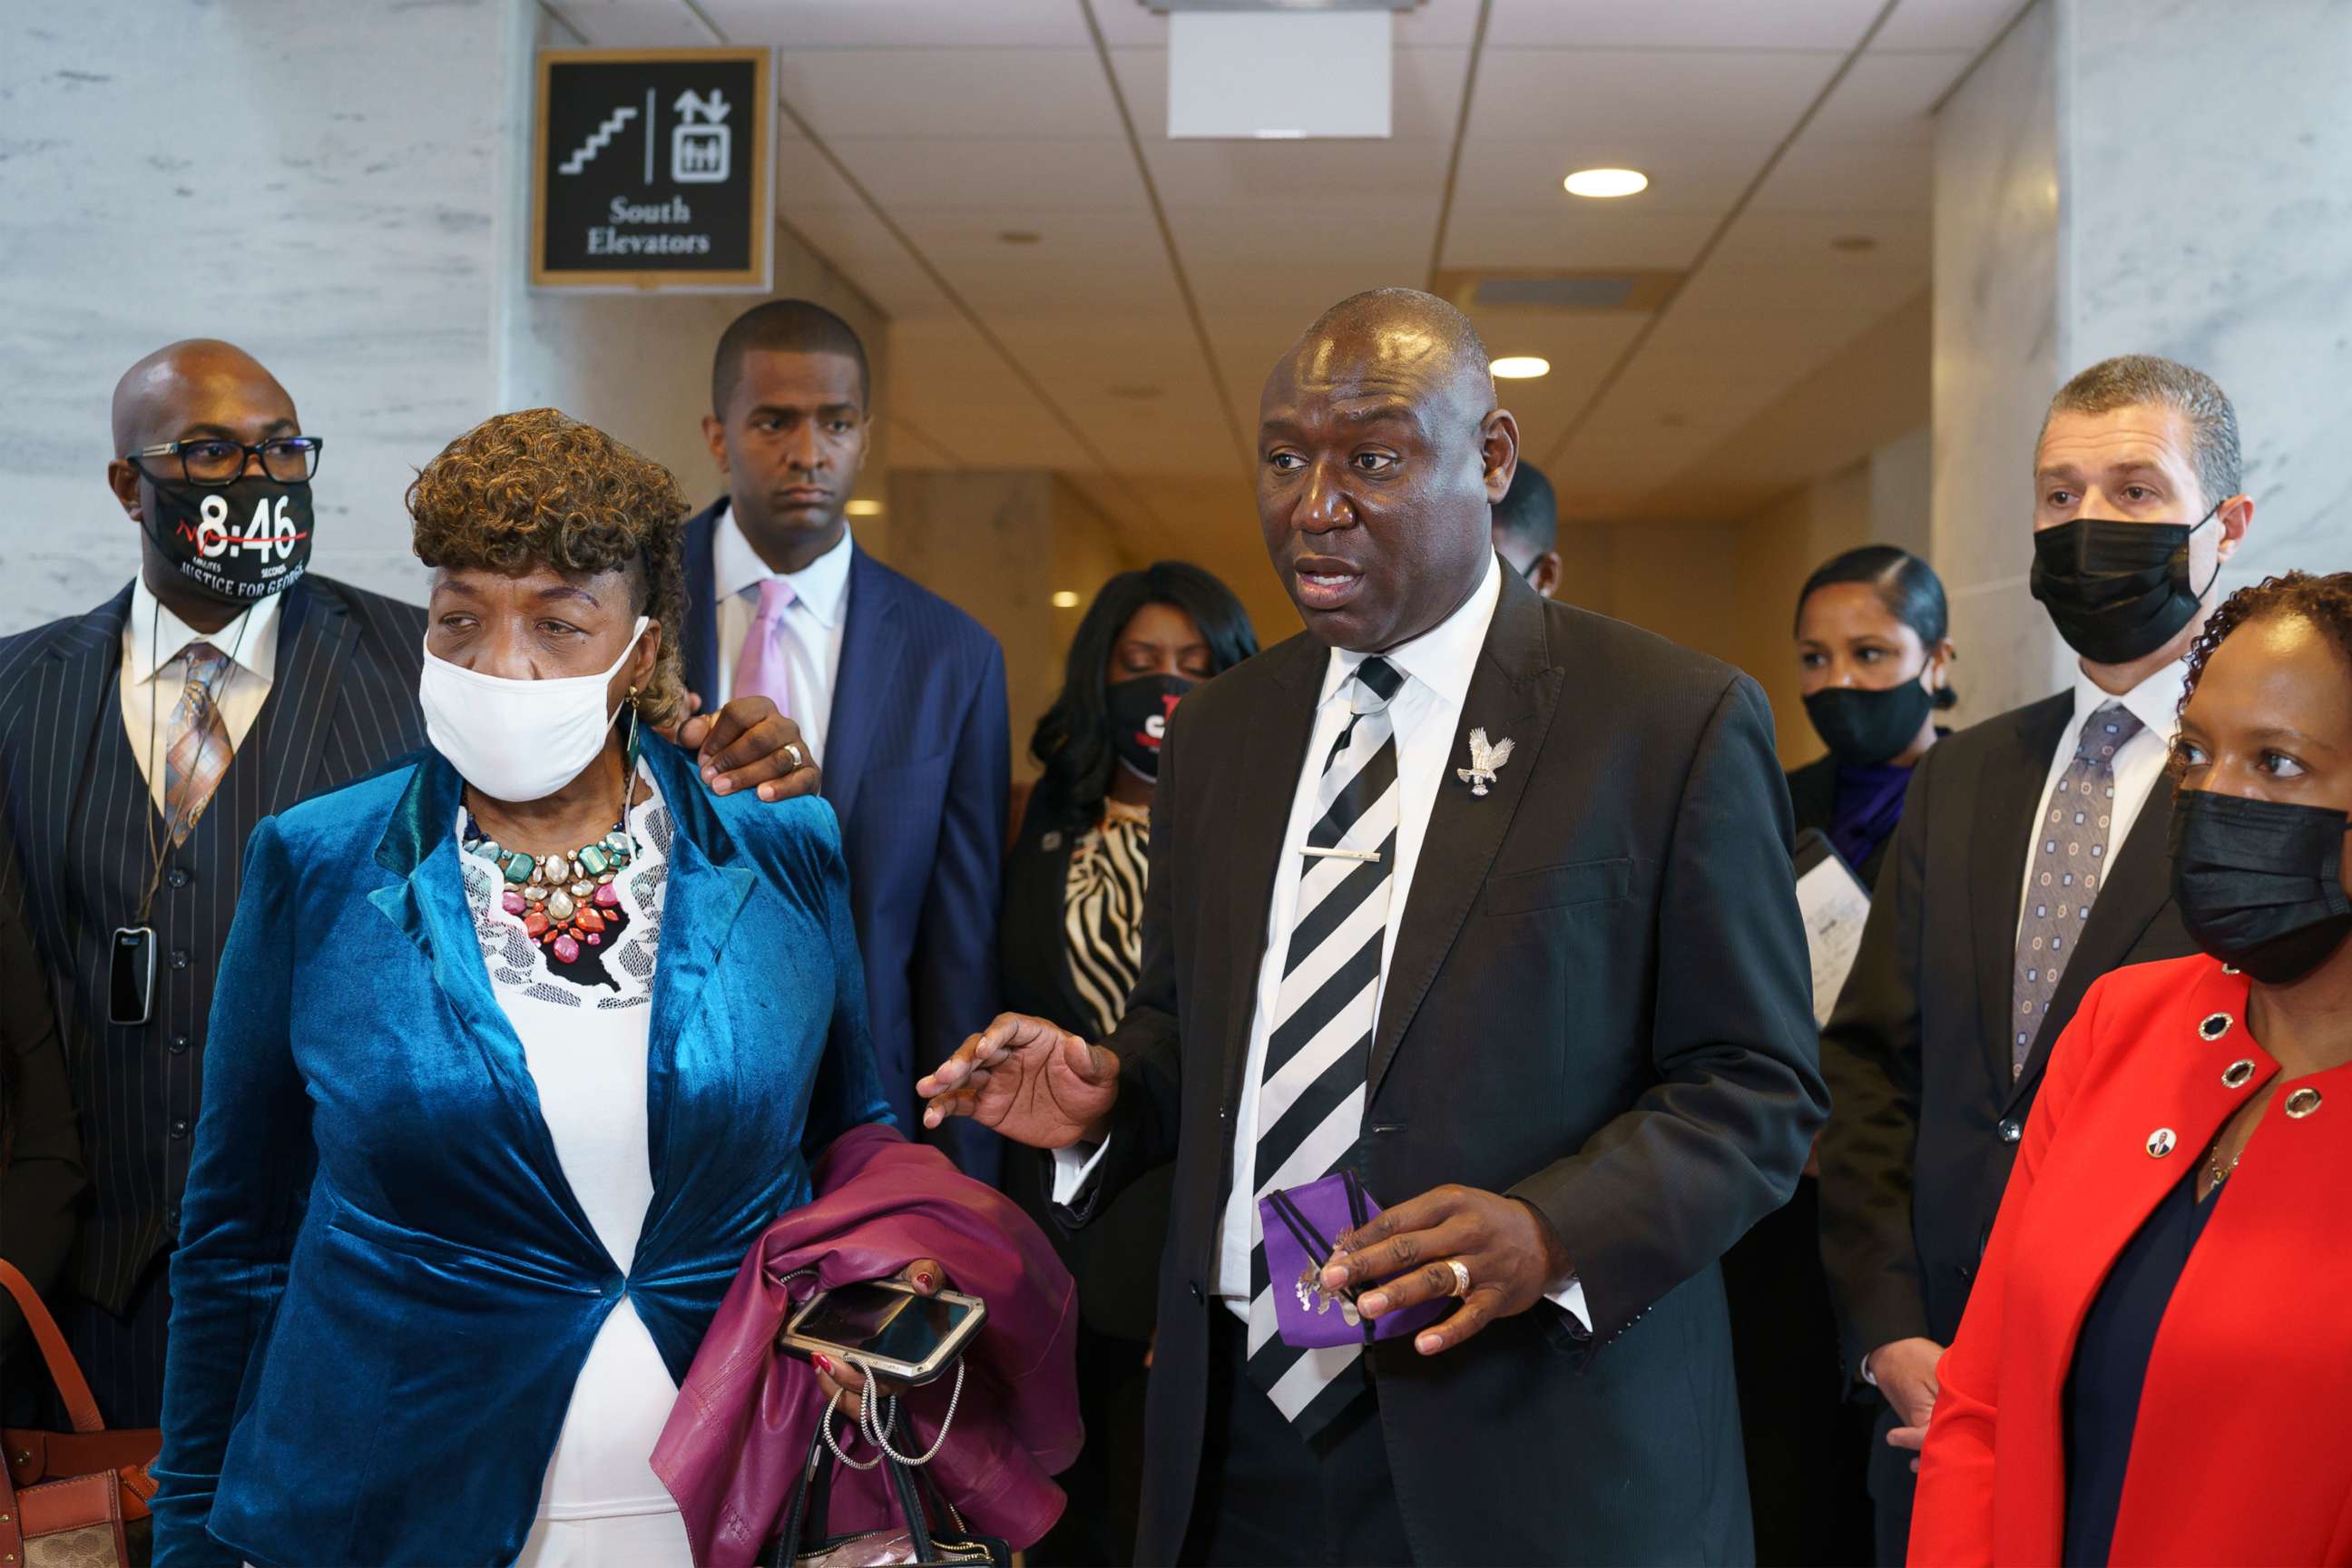 PHOTO: Civil rights attorney Ben Crump is joined by Philonise Floyd, brother of George Floyd, and Gwen Carr, mother of Eric Garner, following a meeting with Sen. Tim Scott at the Capitol in Washington, D.C., April 29, 2021.